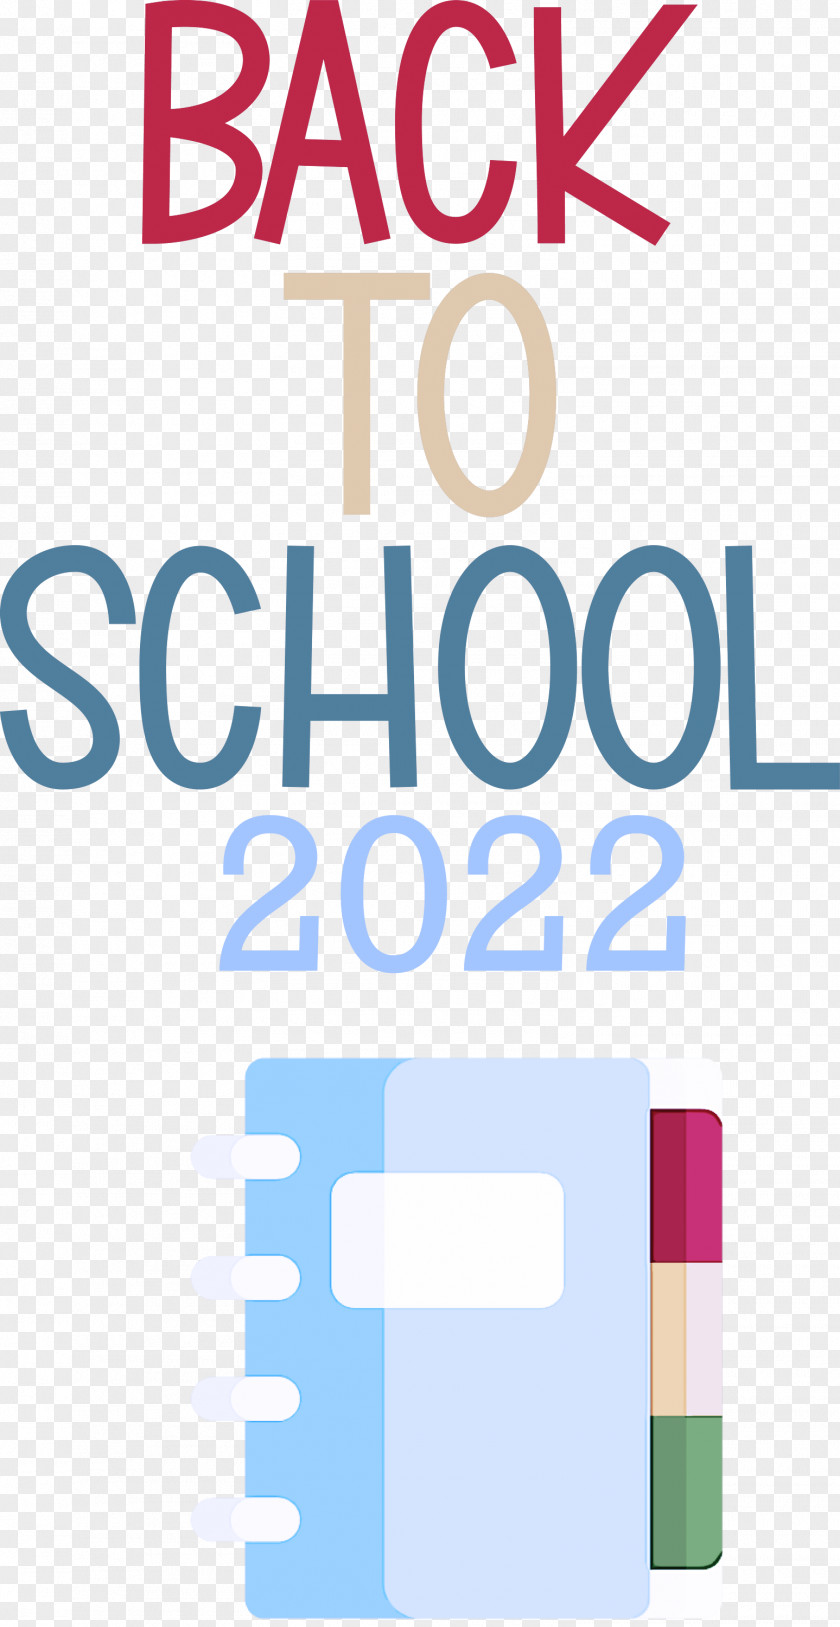 Back To School 2022 PNG